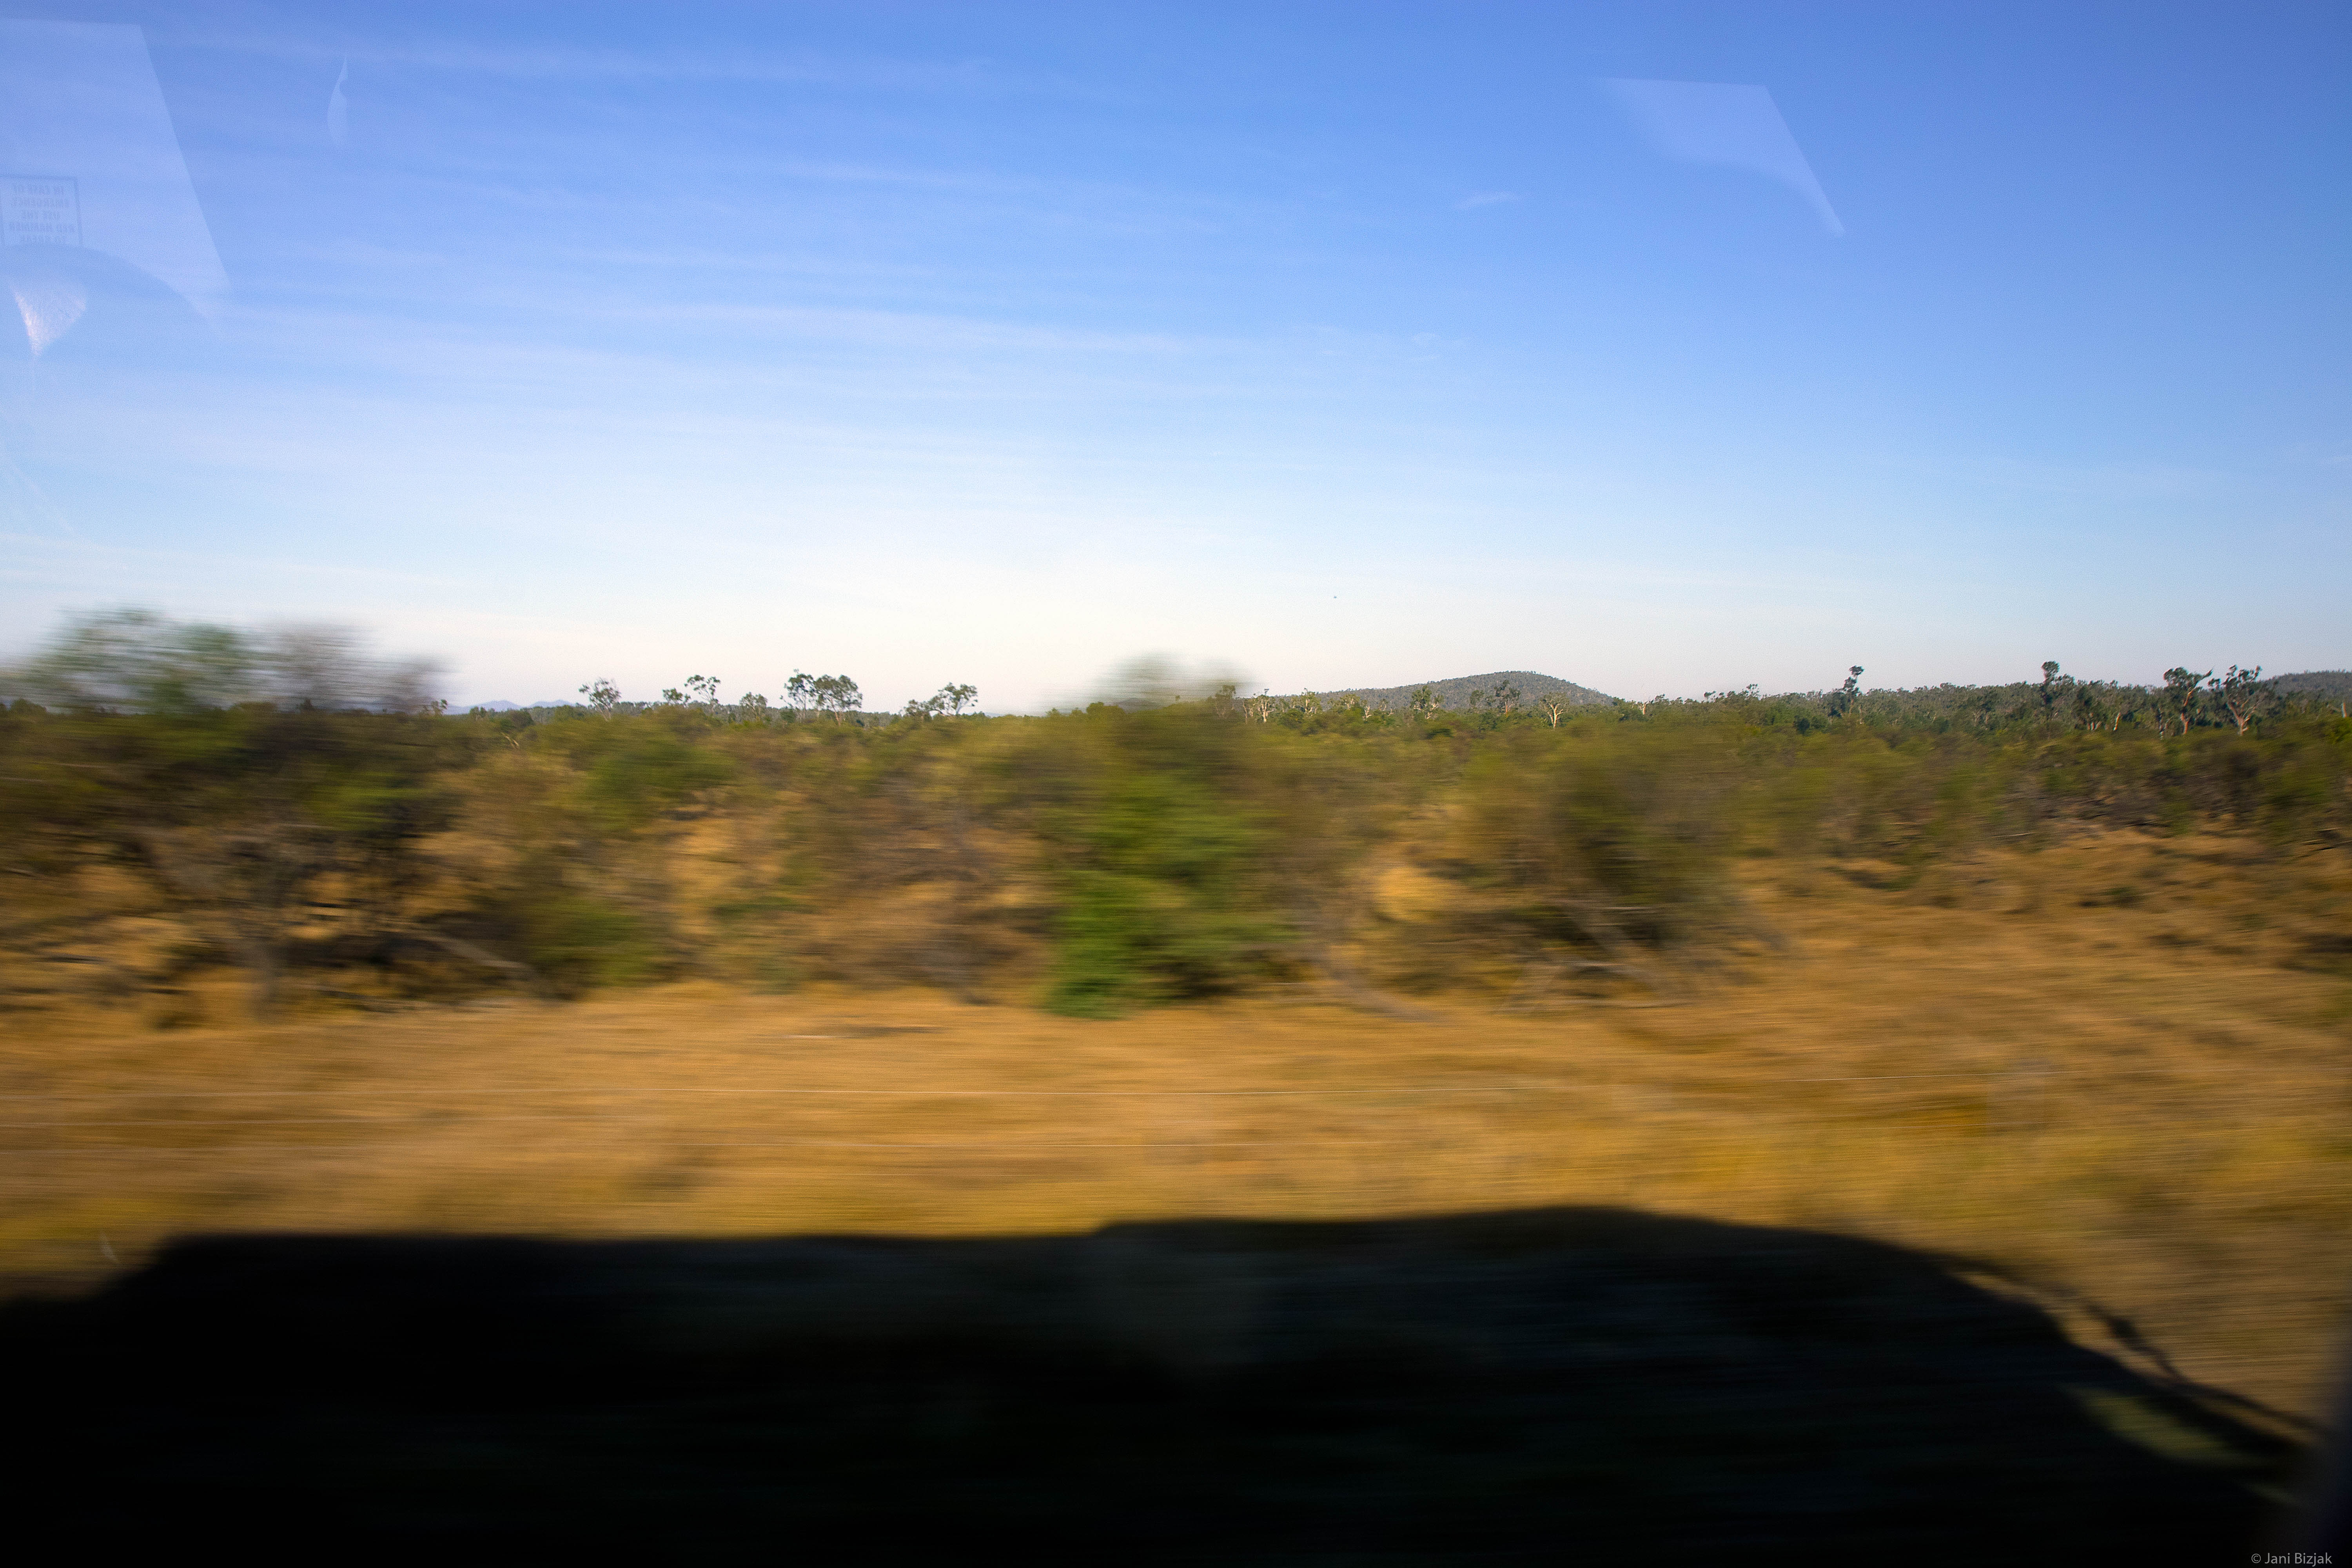 Landscape through the window. Sadly it was nearly impossible to take some more interesting pictures from a bus.